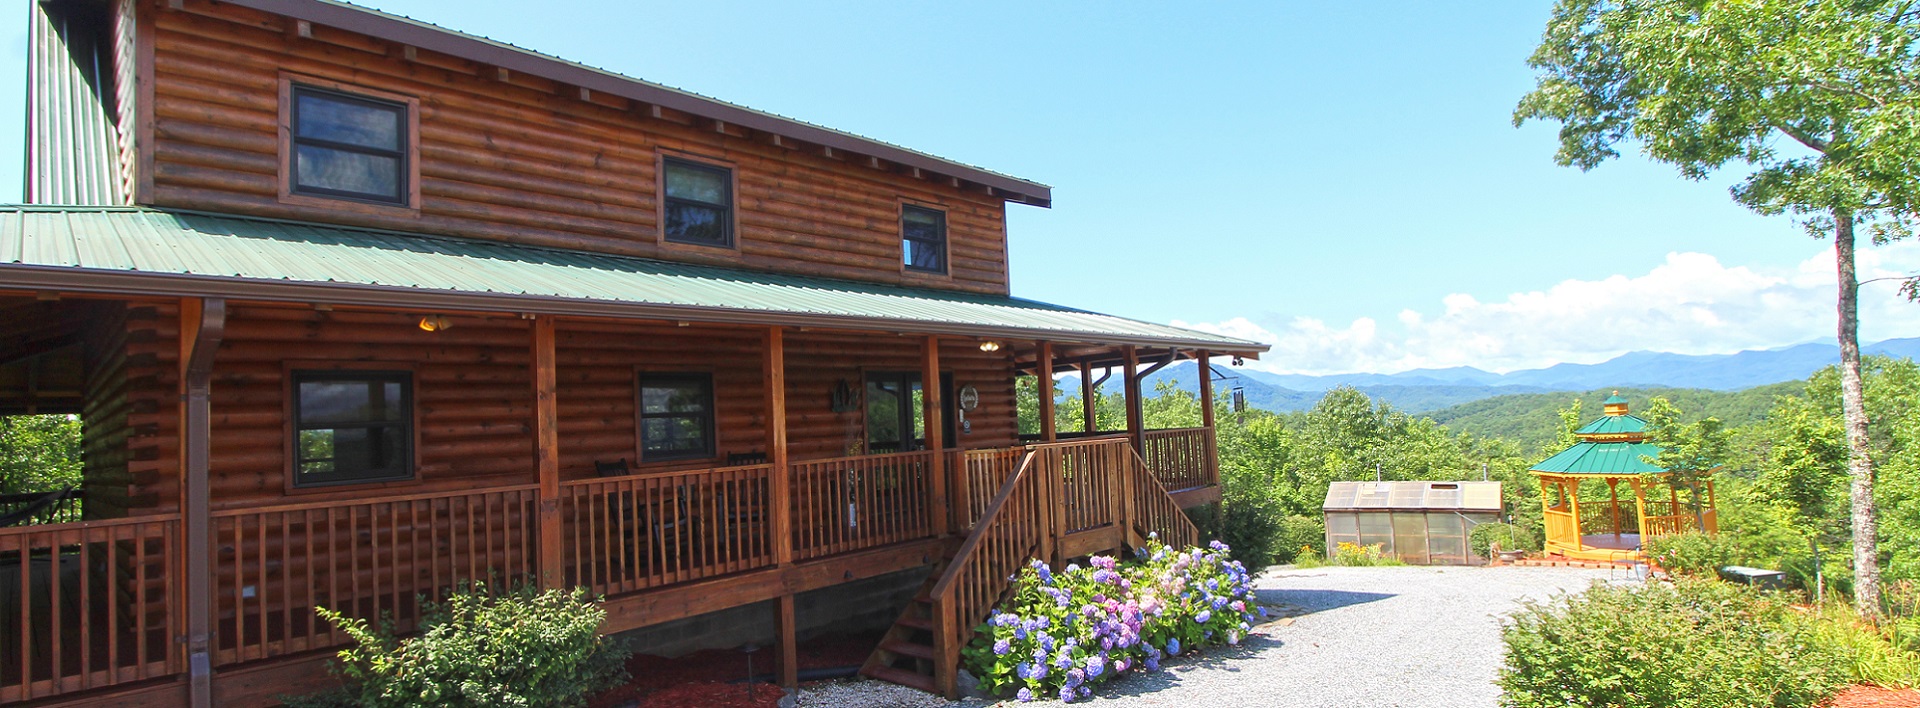 Pet-friendly Cabins With Fenced Yards